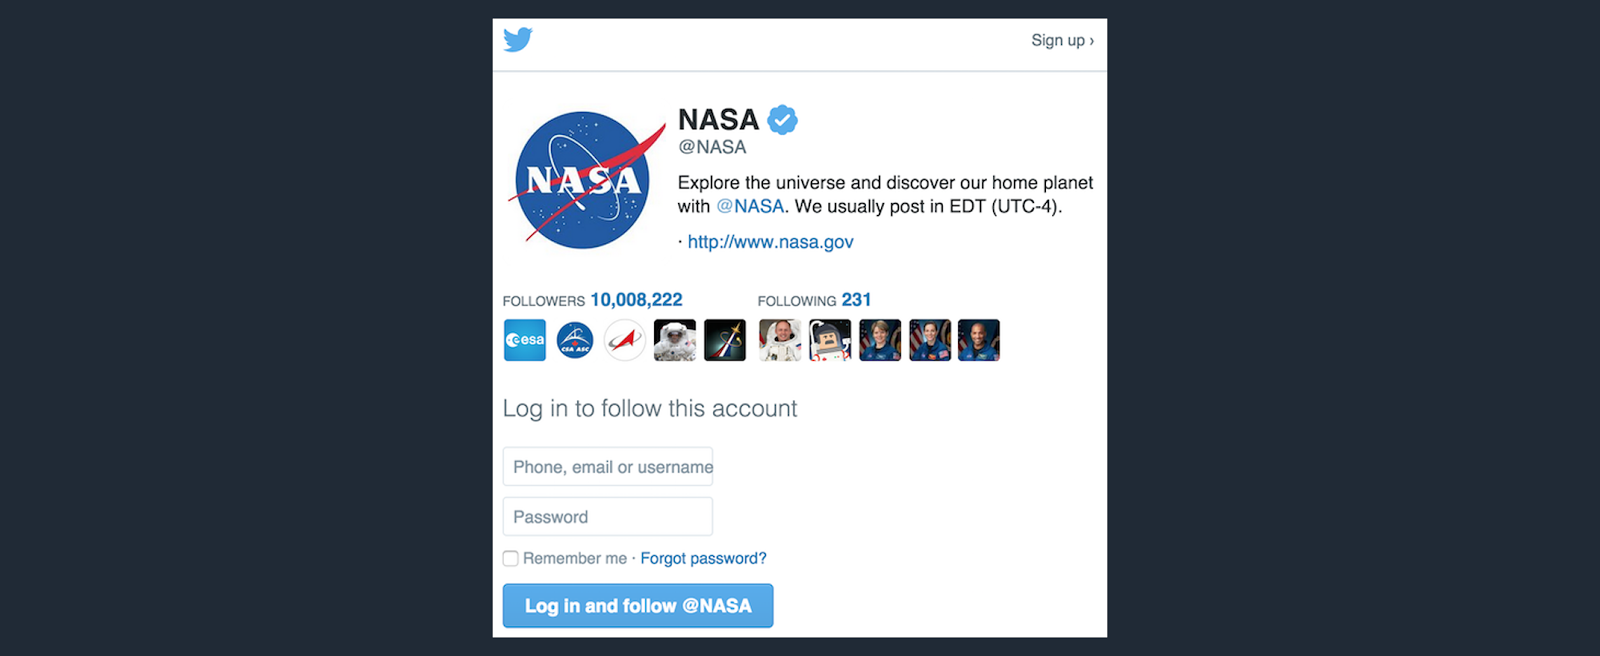 Twitter uses buttons to nudge their users to take desired actions